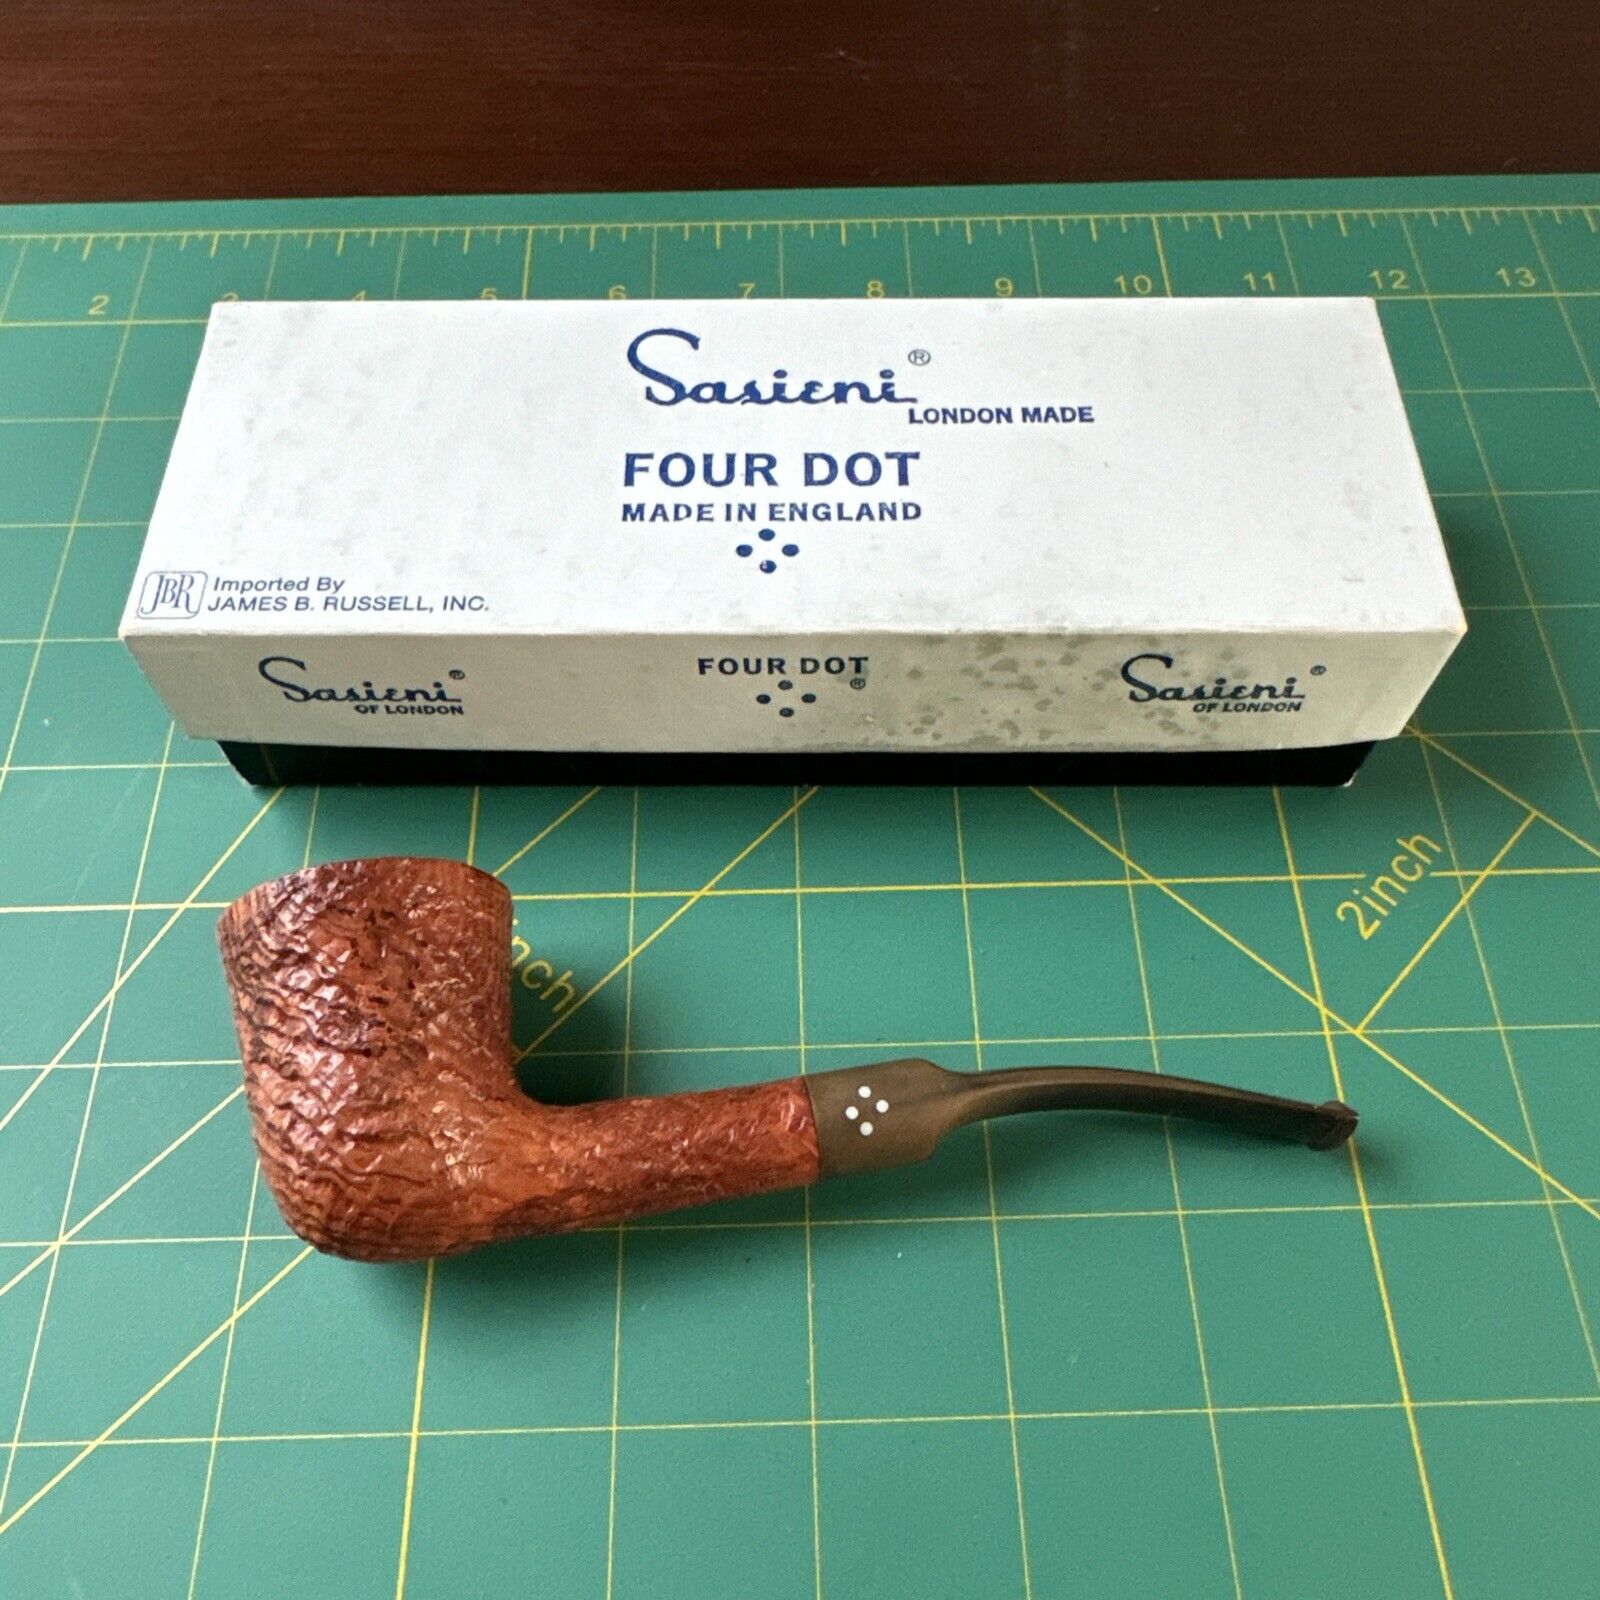 Sasieni 4 Dot Tobacco Pipe Excellent Condition With Original Box And Sleeve